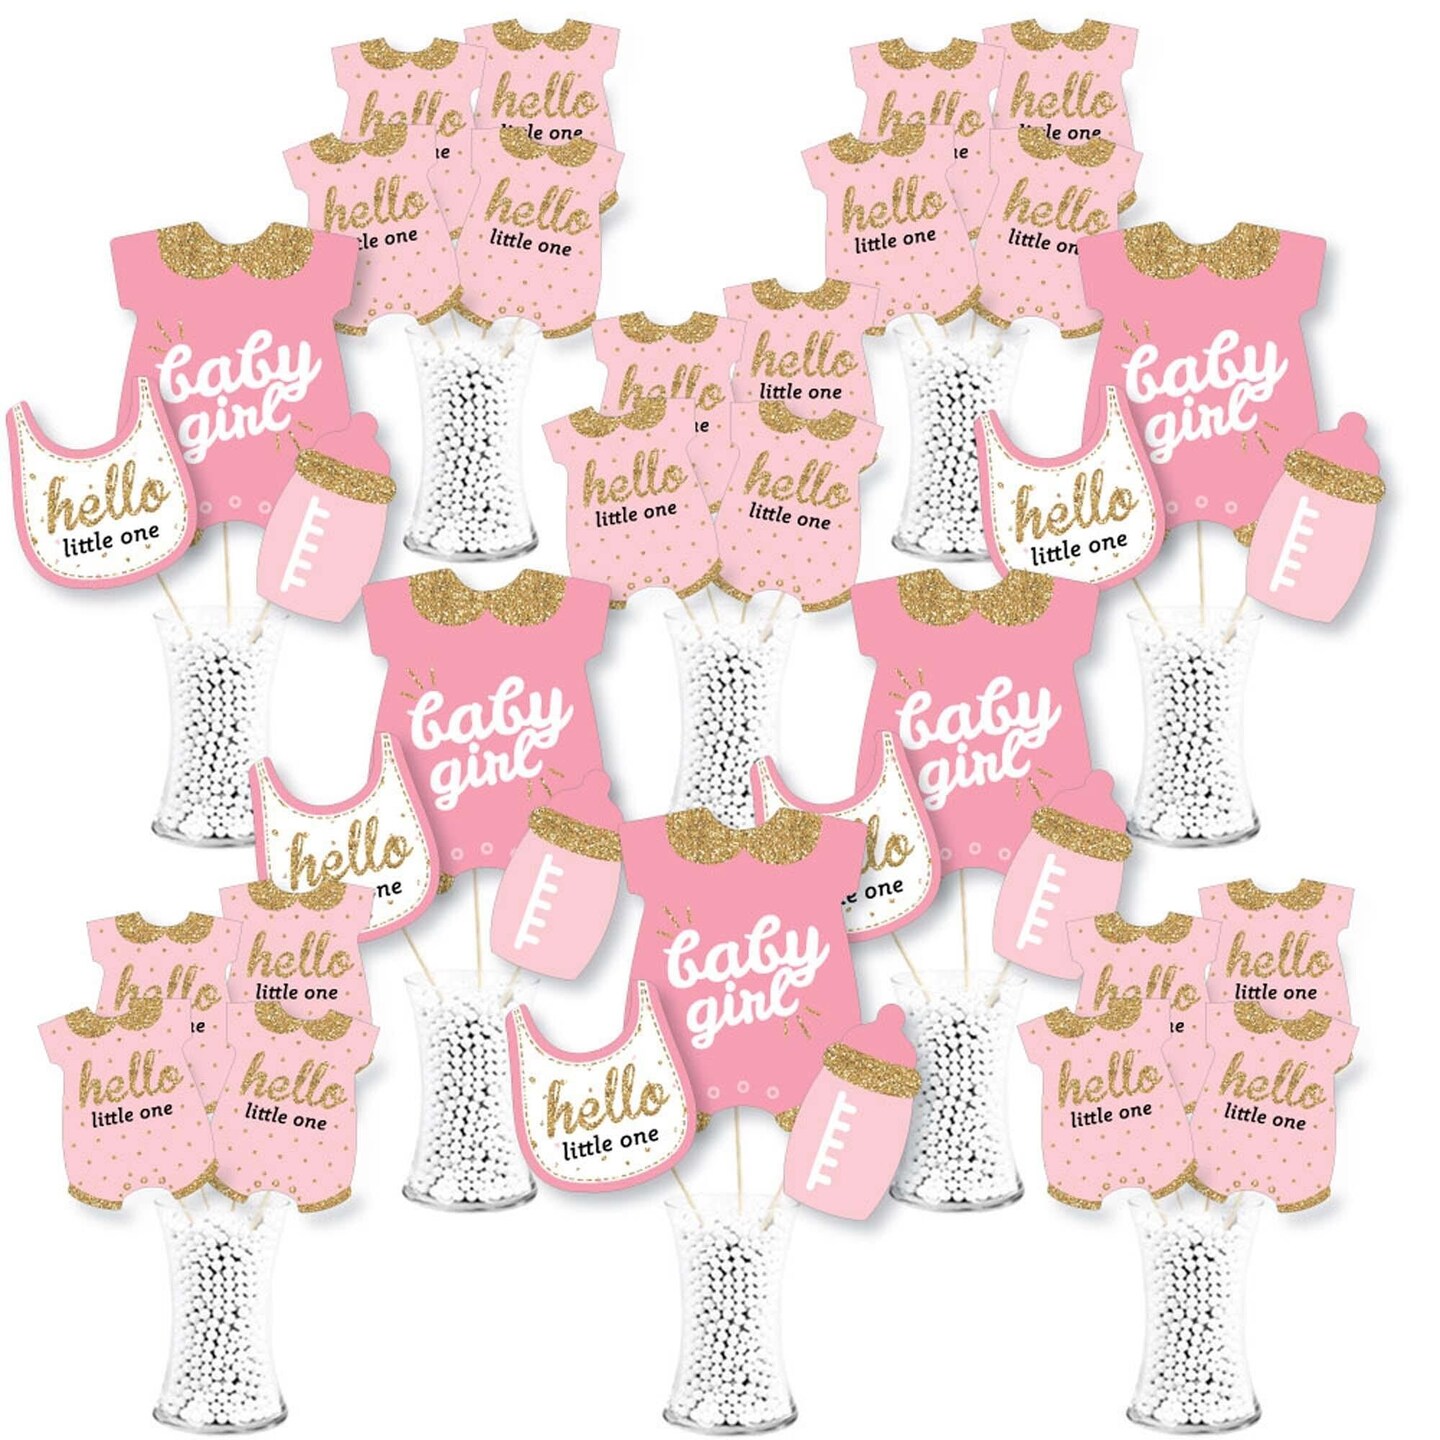 Big Dot of Happiness Hello Little One - Pink and Gold - Girl Baby Shower Centerpiece Sticks - Showstopper Table Toppers - 35 Pieces